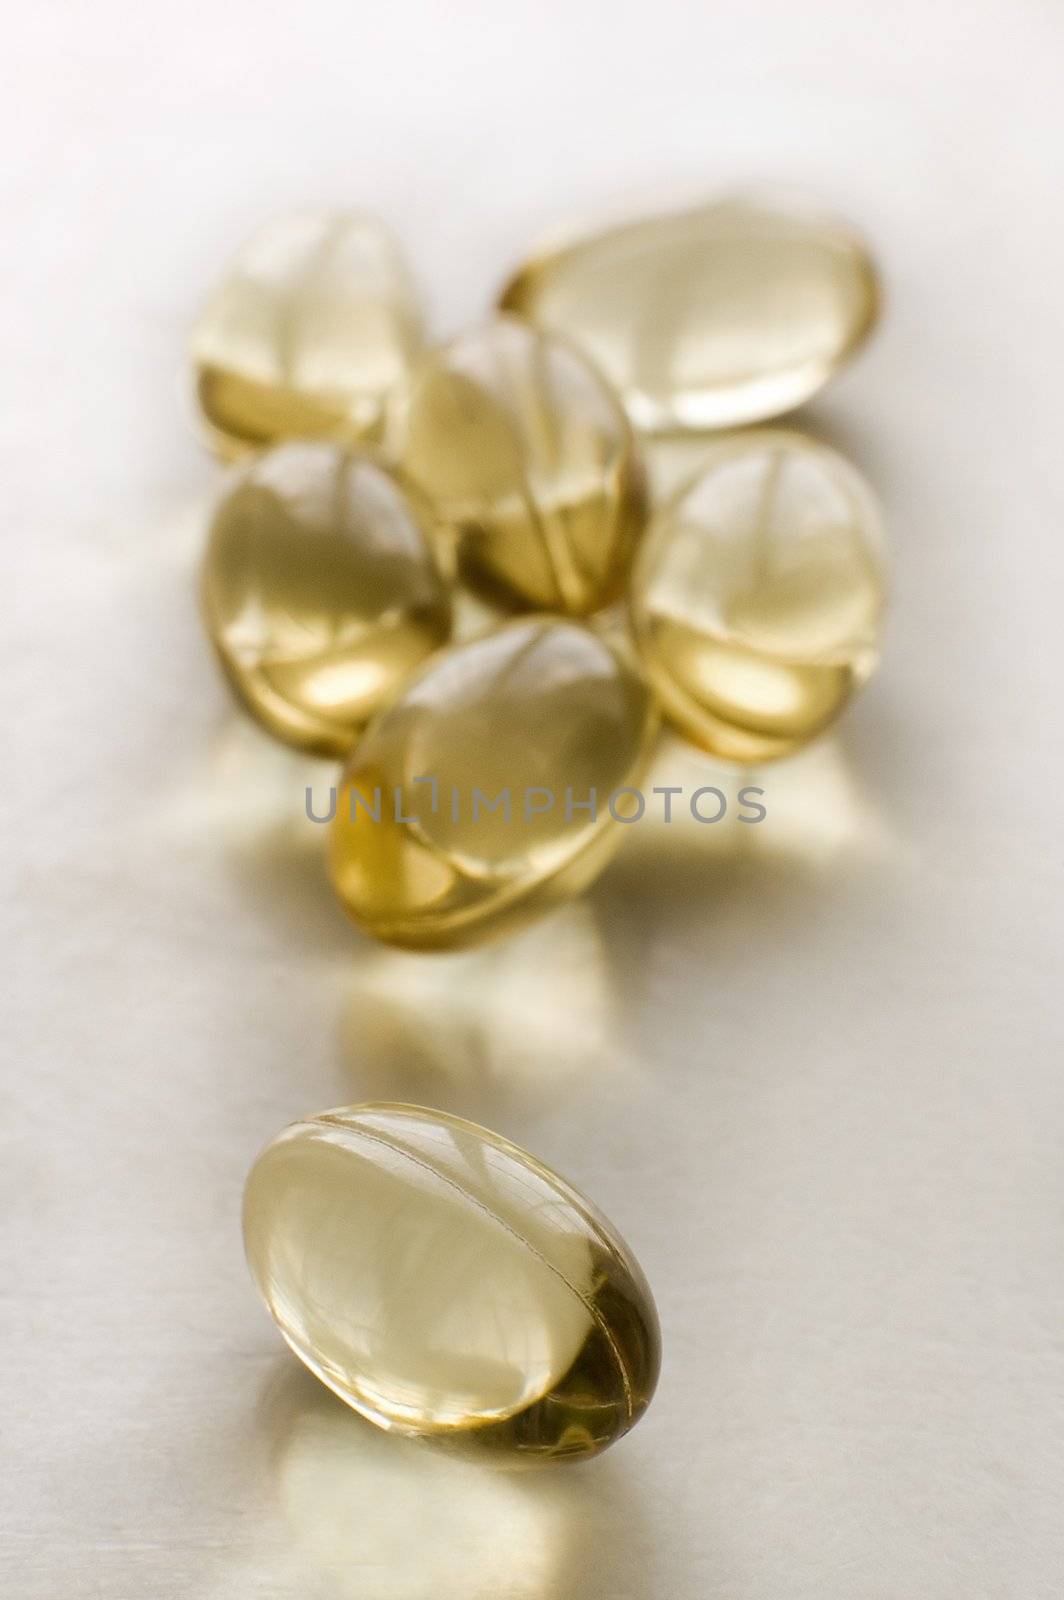 fish oil capsules by rorem